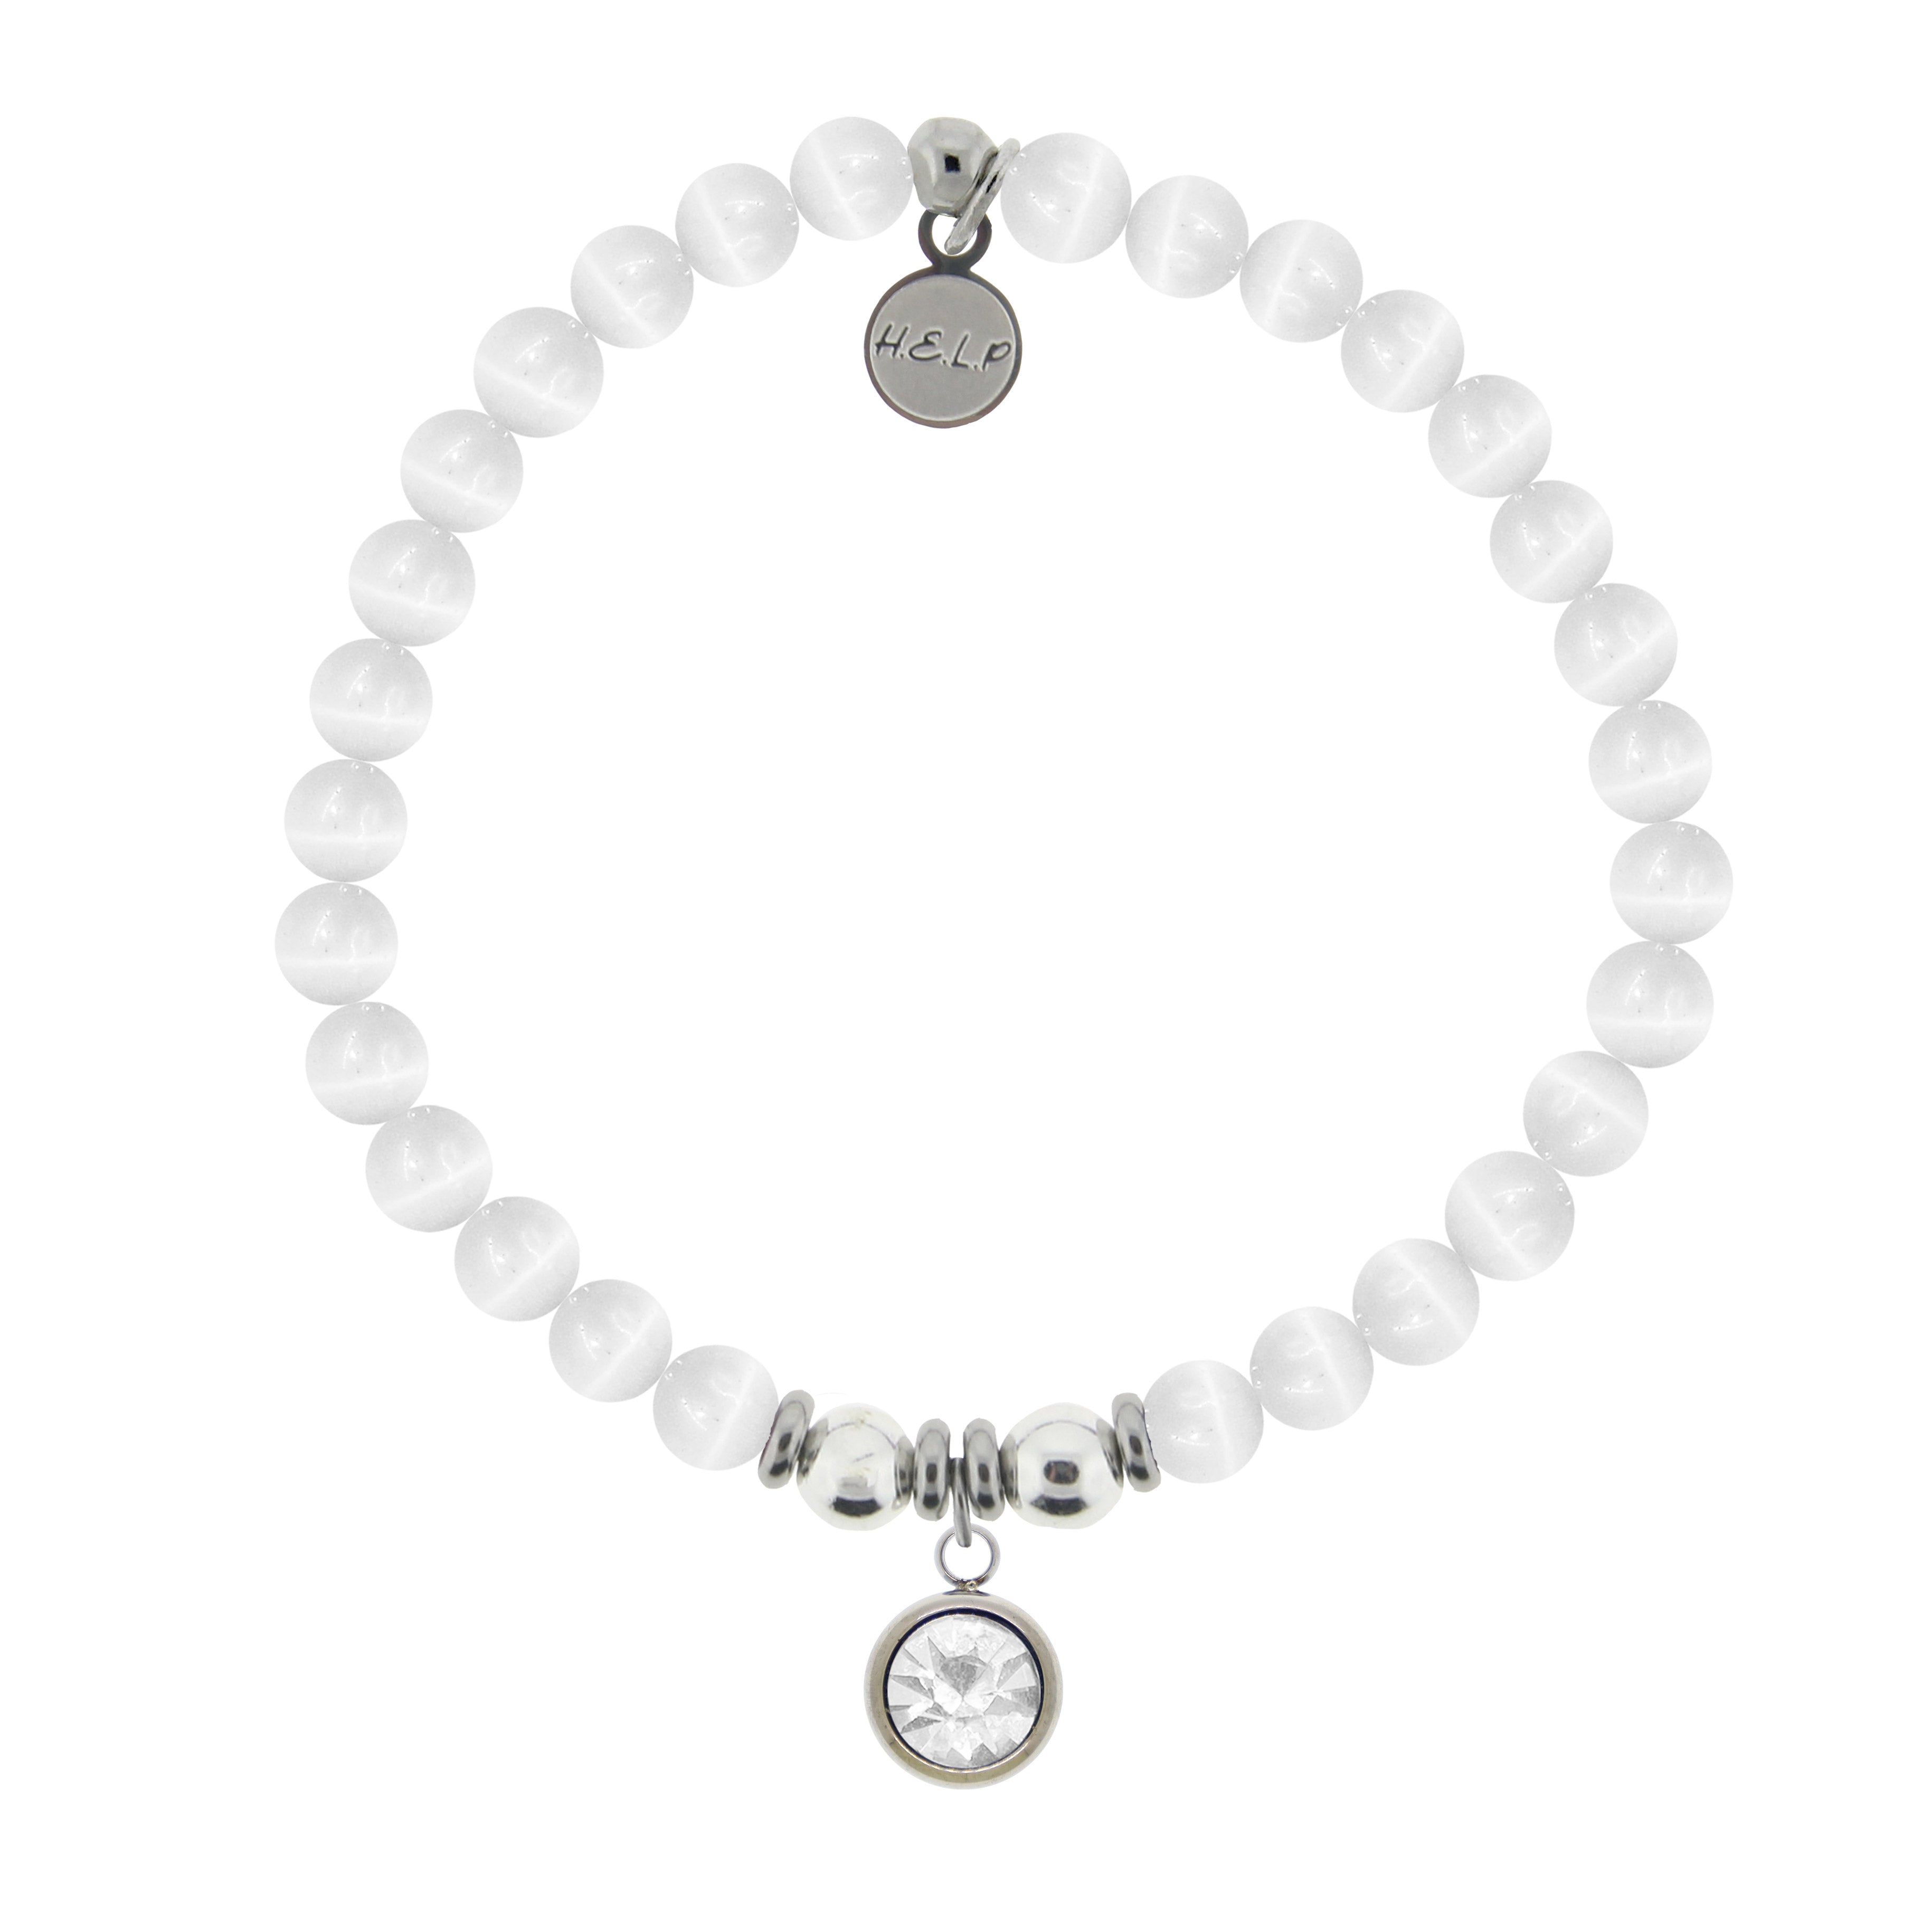 HELP Collection: Birthstone Collection - April Diamond Crystal Charm with White Cats Eye Charity Bracelet